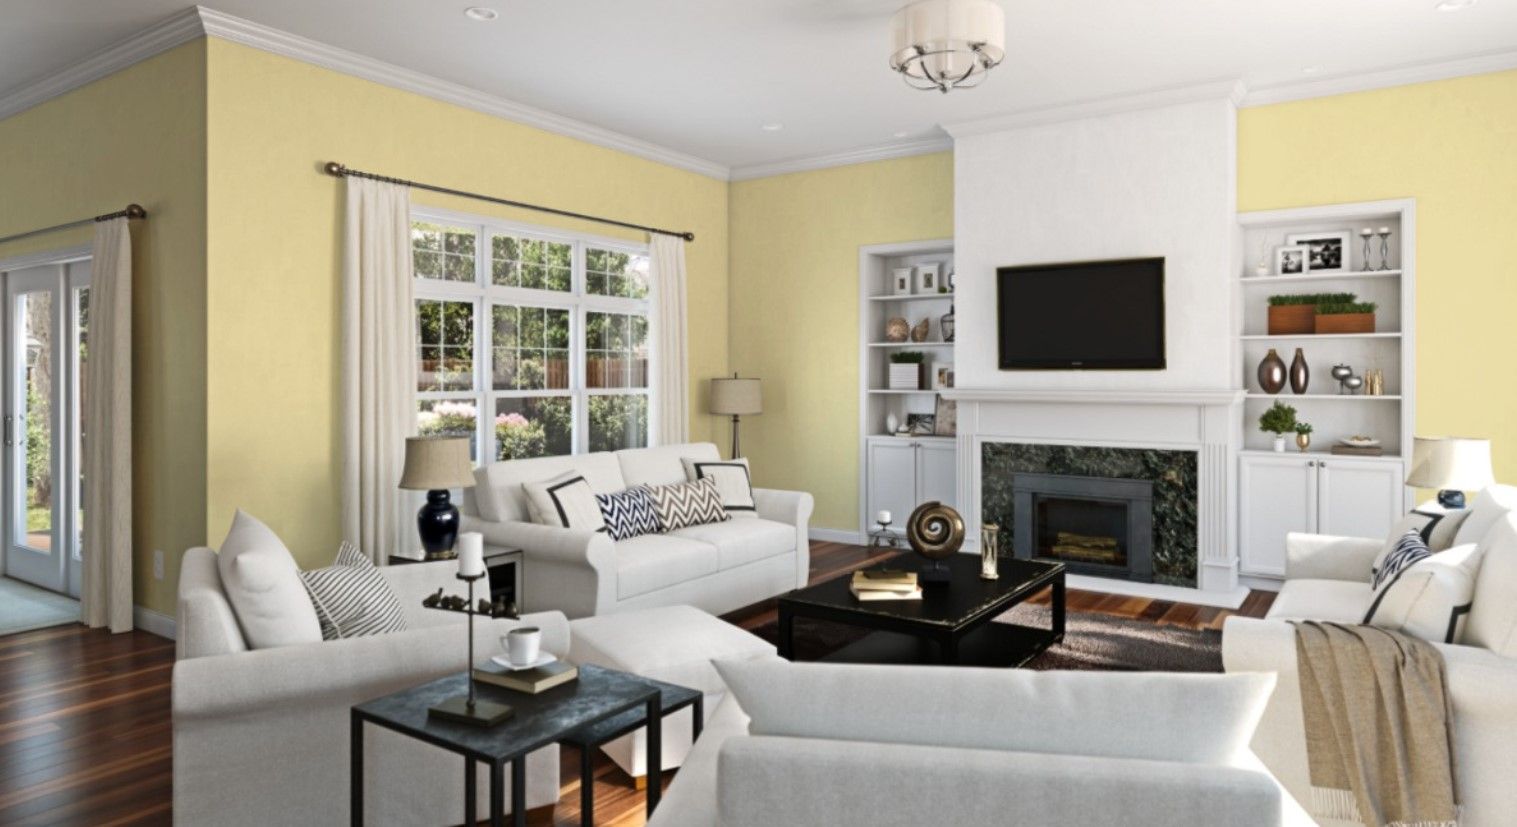 Sherwin Williams Icy Lemonades look good in well-lit large spaces in the home. (2)